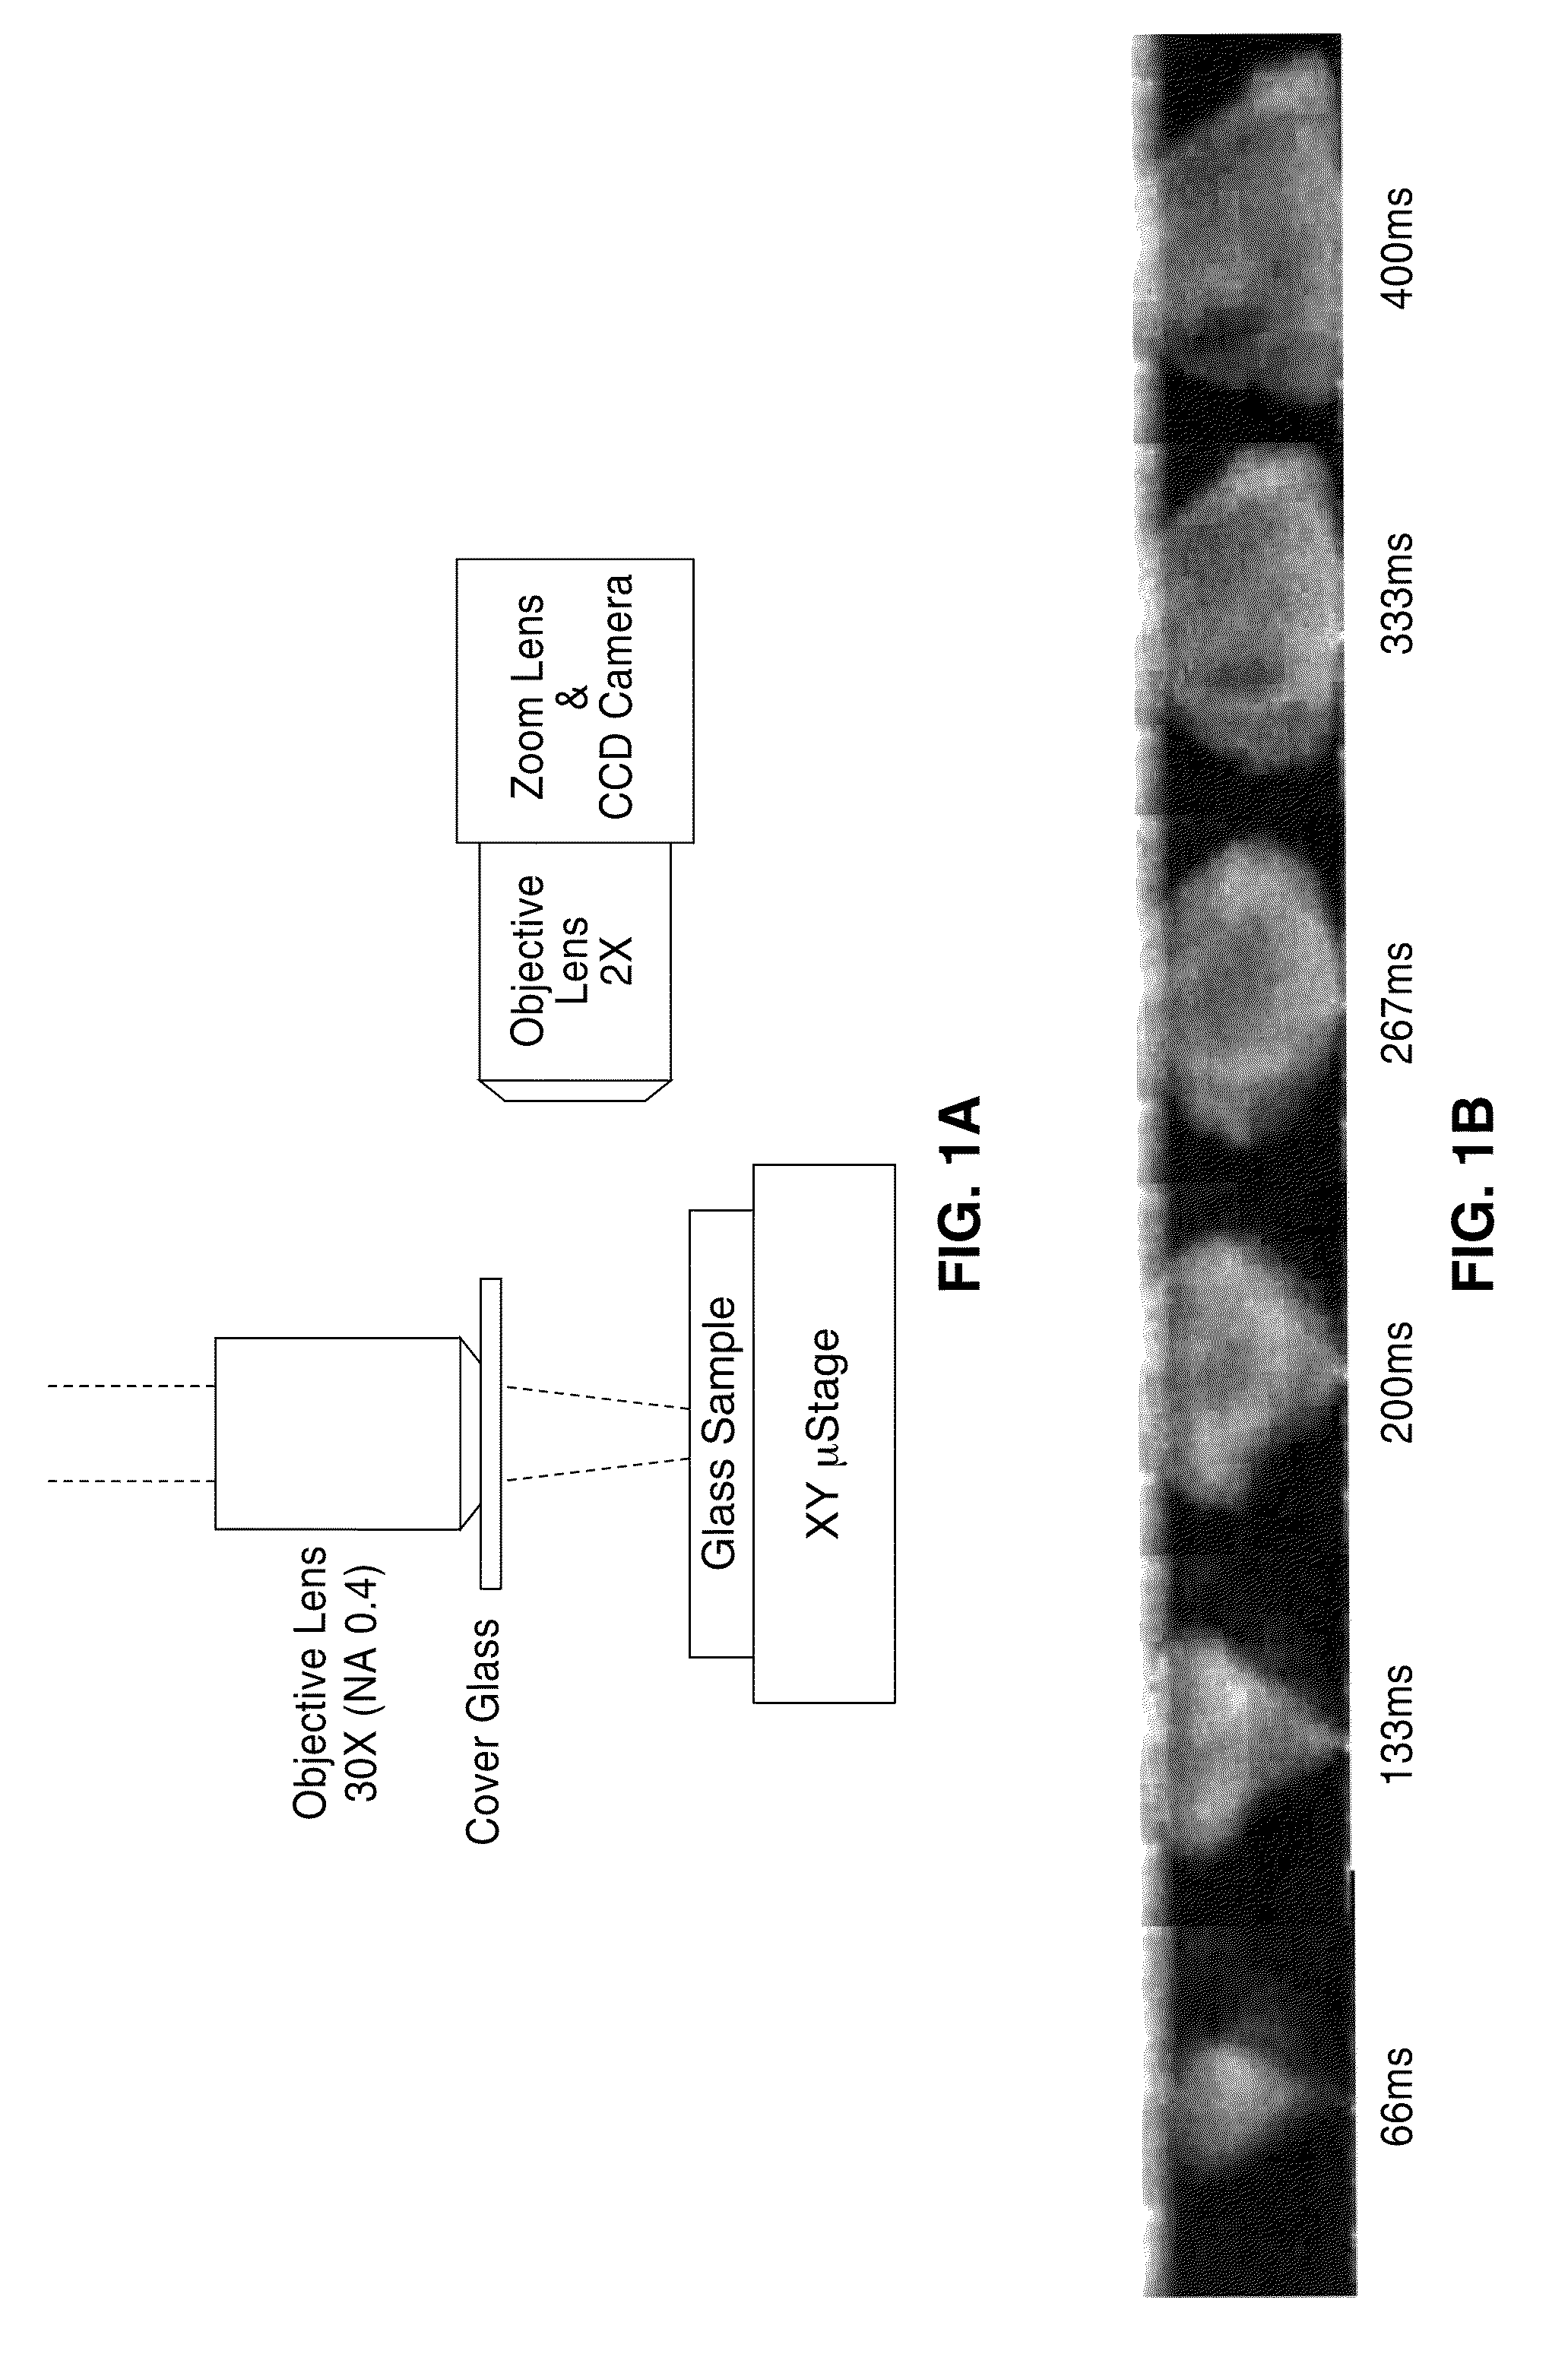 Method for producing active glass nanoparticles by laser ablation